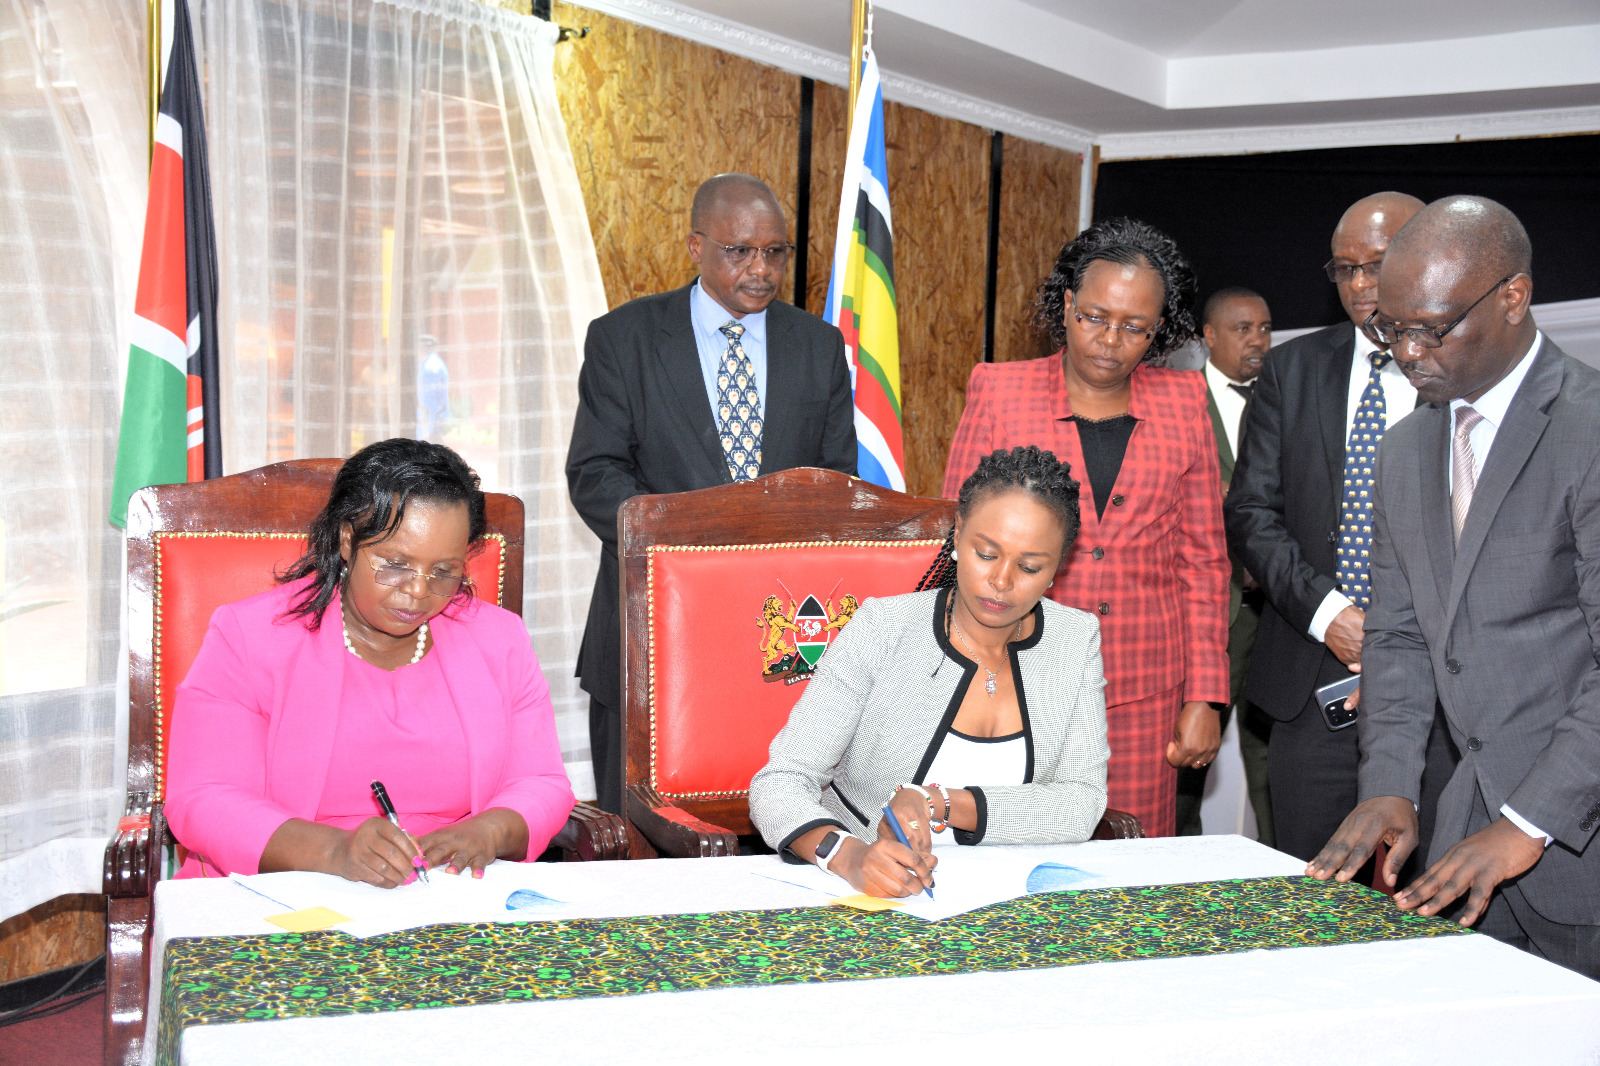 Cabinet Secretary for Tourism, Wildlife and Heritage Penina Malonza,(seated left and Principal Secretary for State Department for Wildlife, Ms Silvia Museiya Right) sign the 2023/2024 Performance Contract for the State department at the Bomas of Kenya witnessed by Heads of Department at the background.